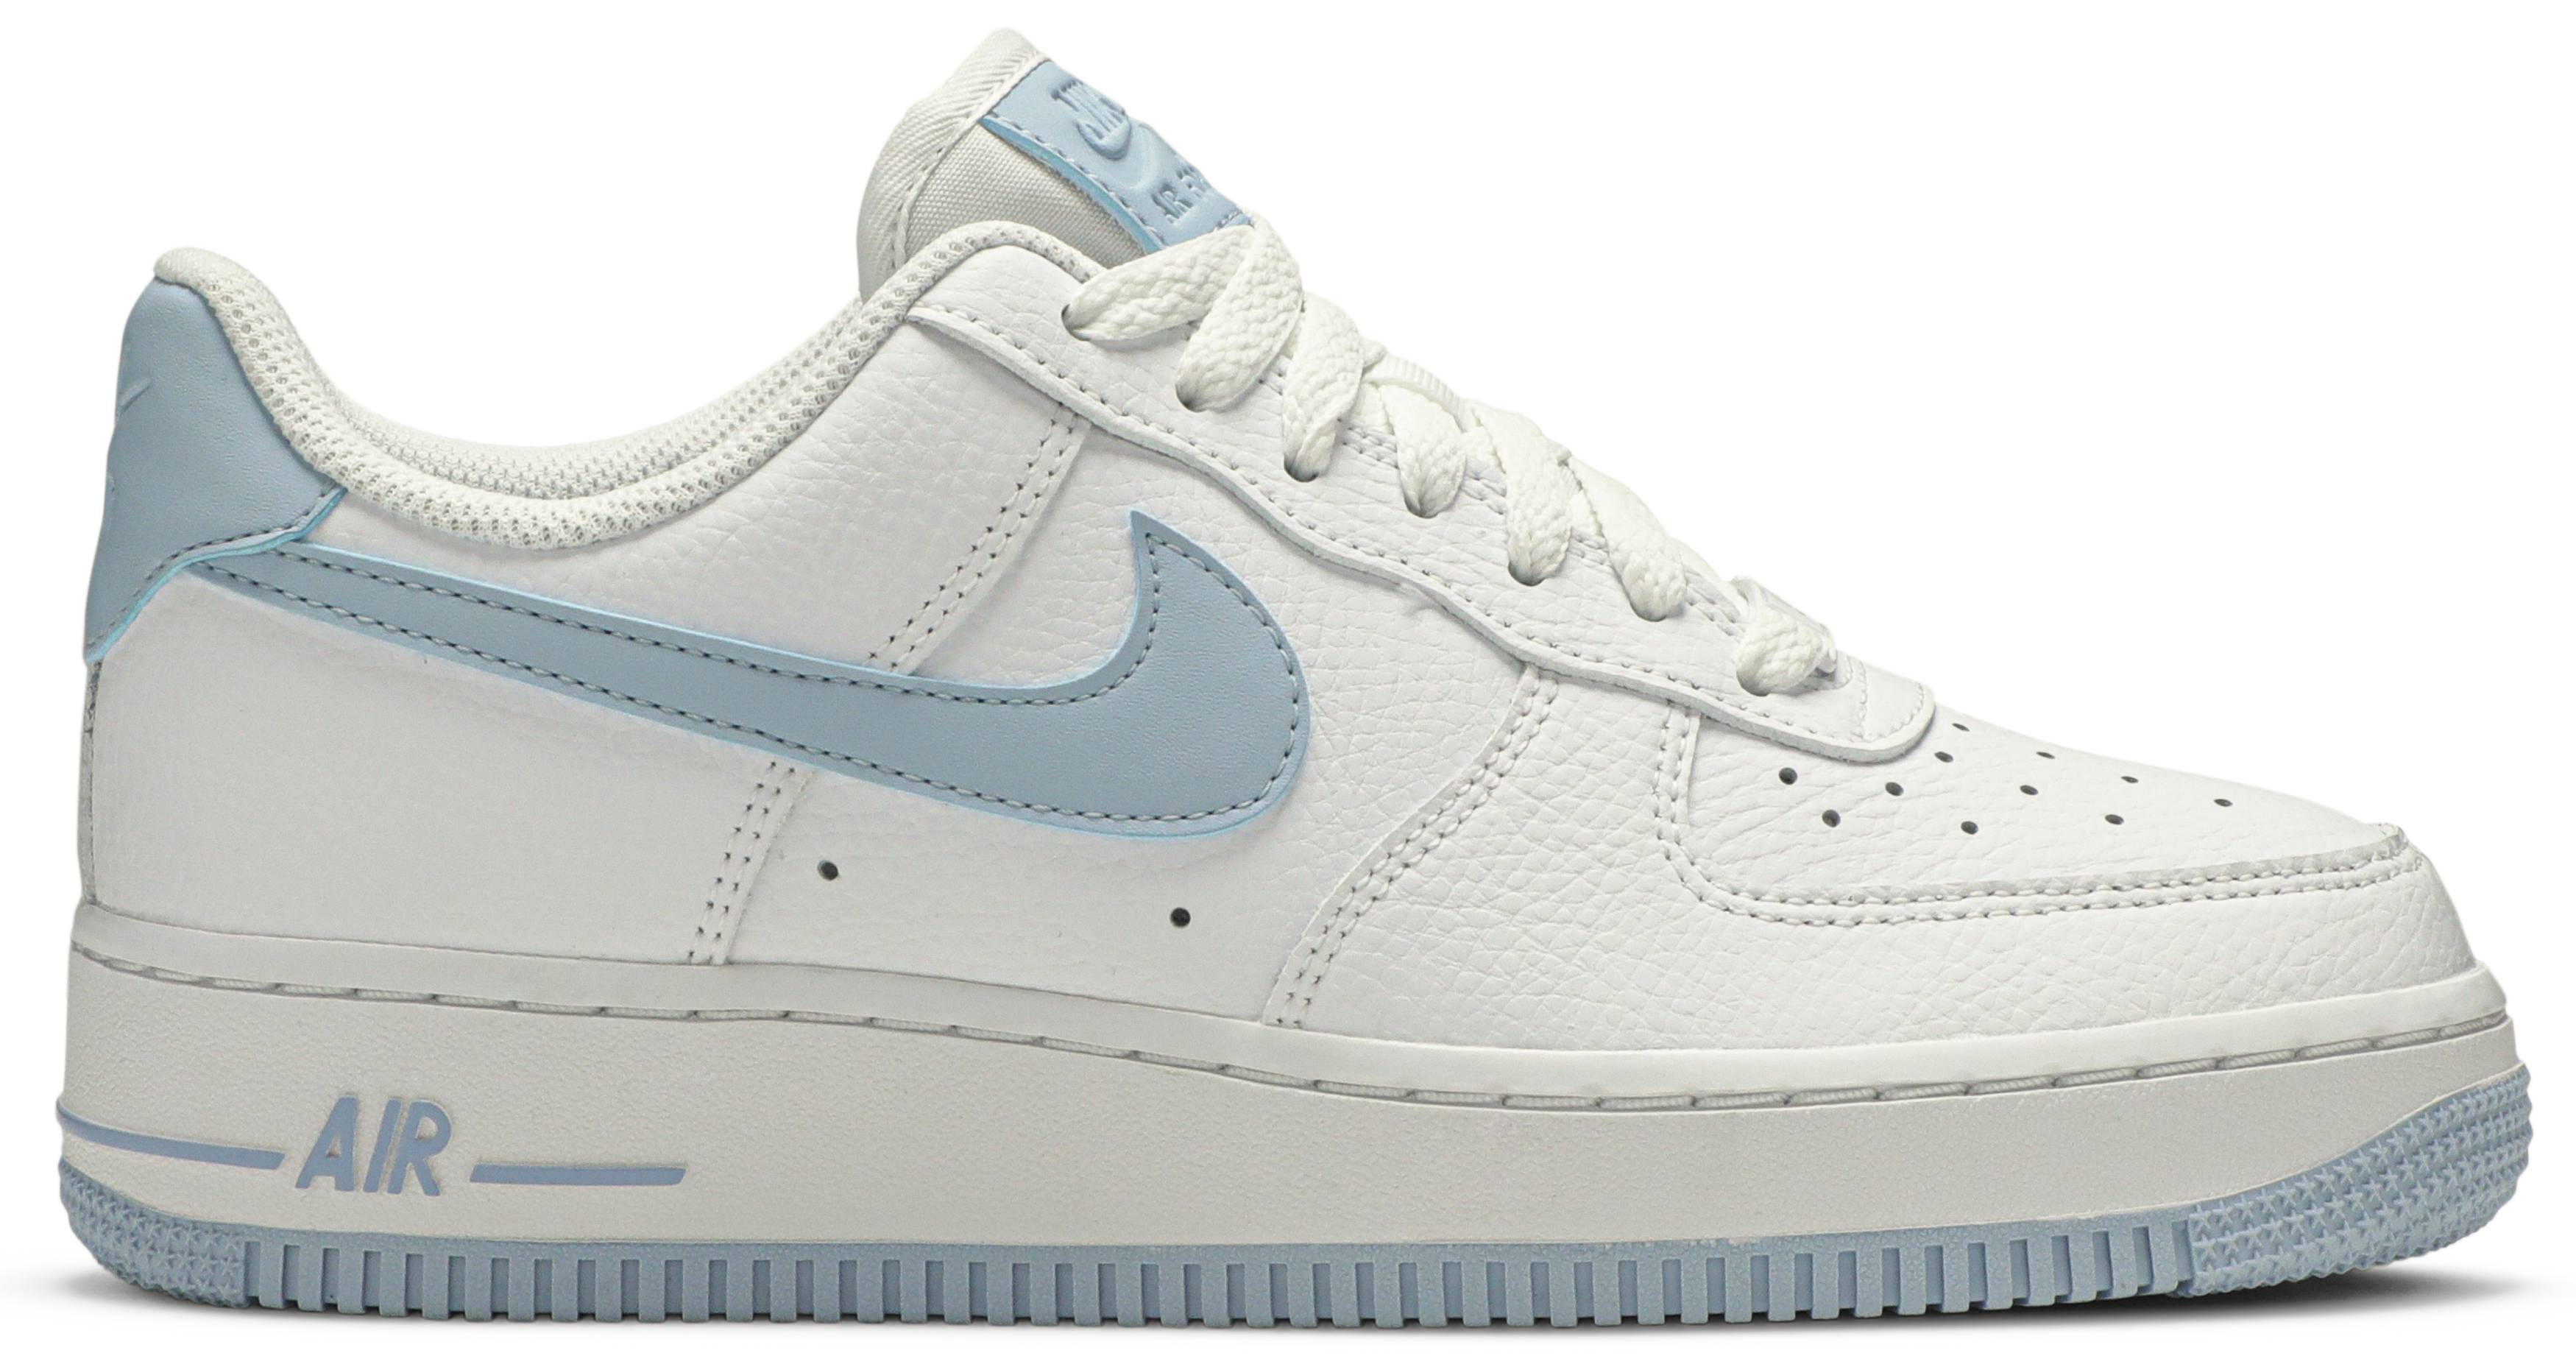 nike air force 1 low blue swoosh,Save up to 16%,www.masserv.com